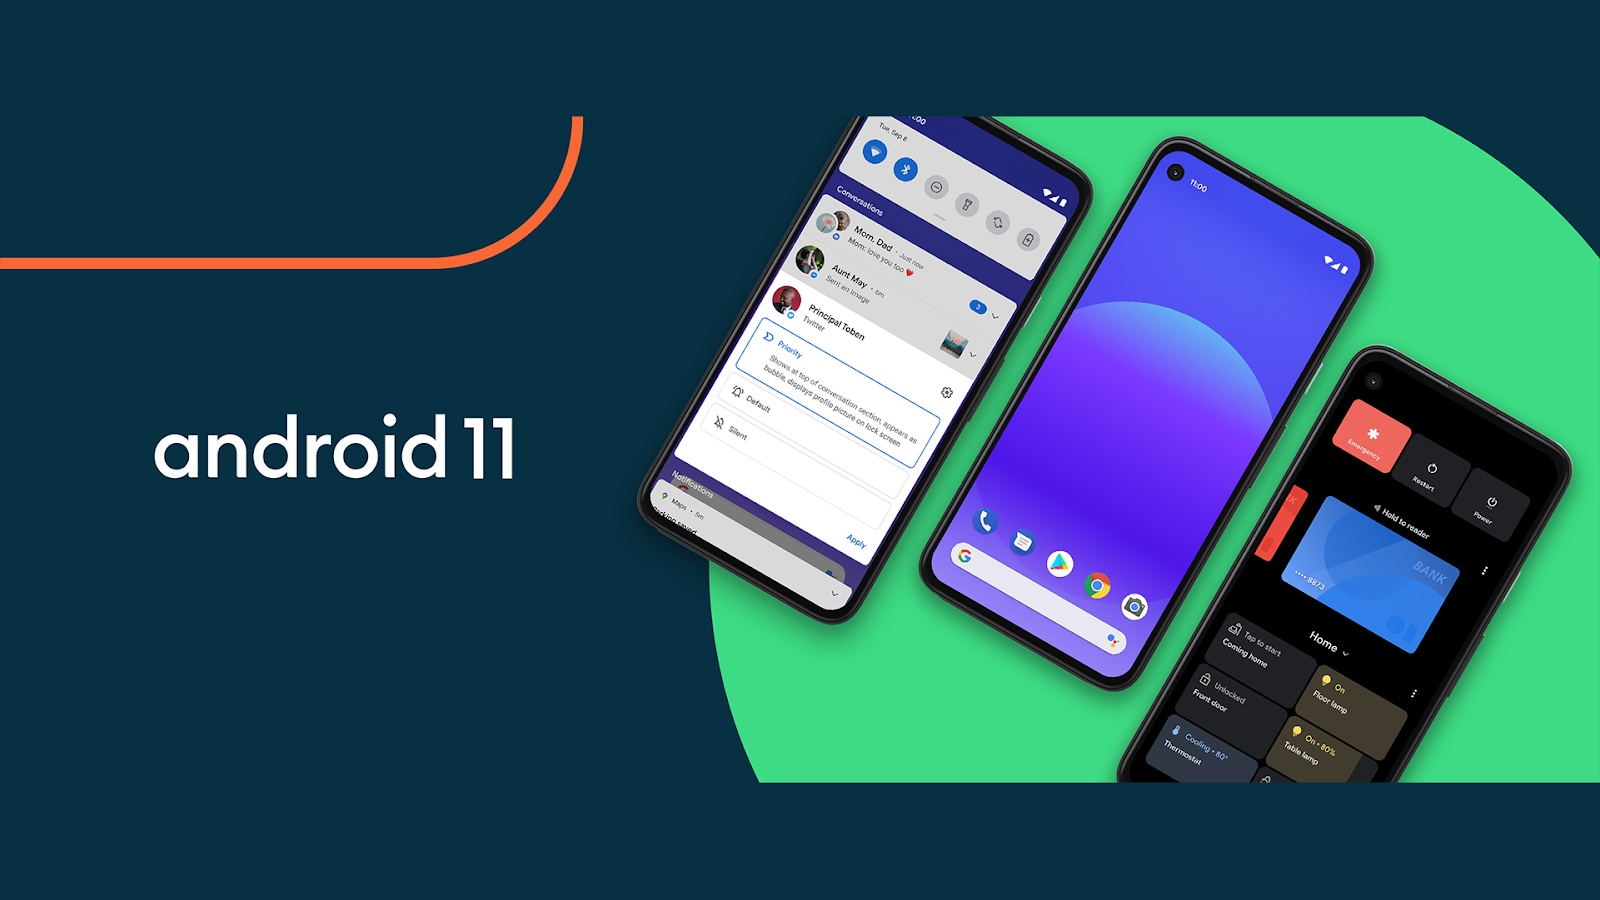 Here’s how you can install the freshly baked Android 11 update on your smartphone